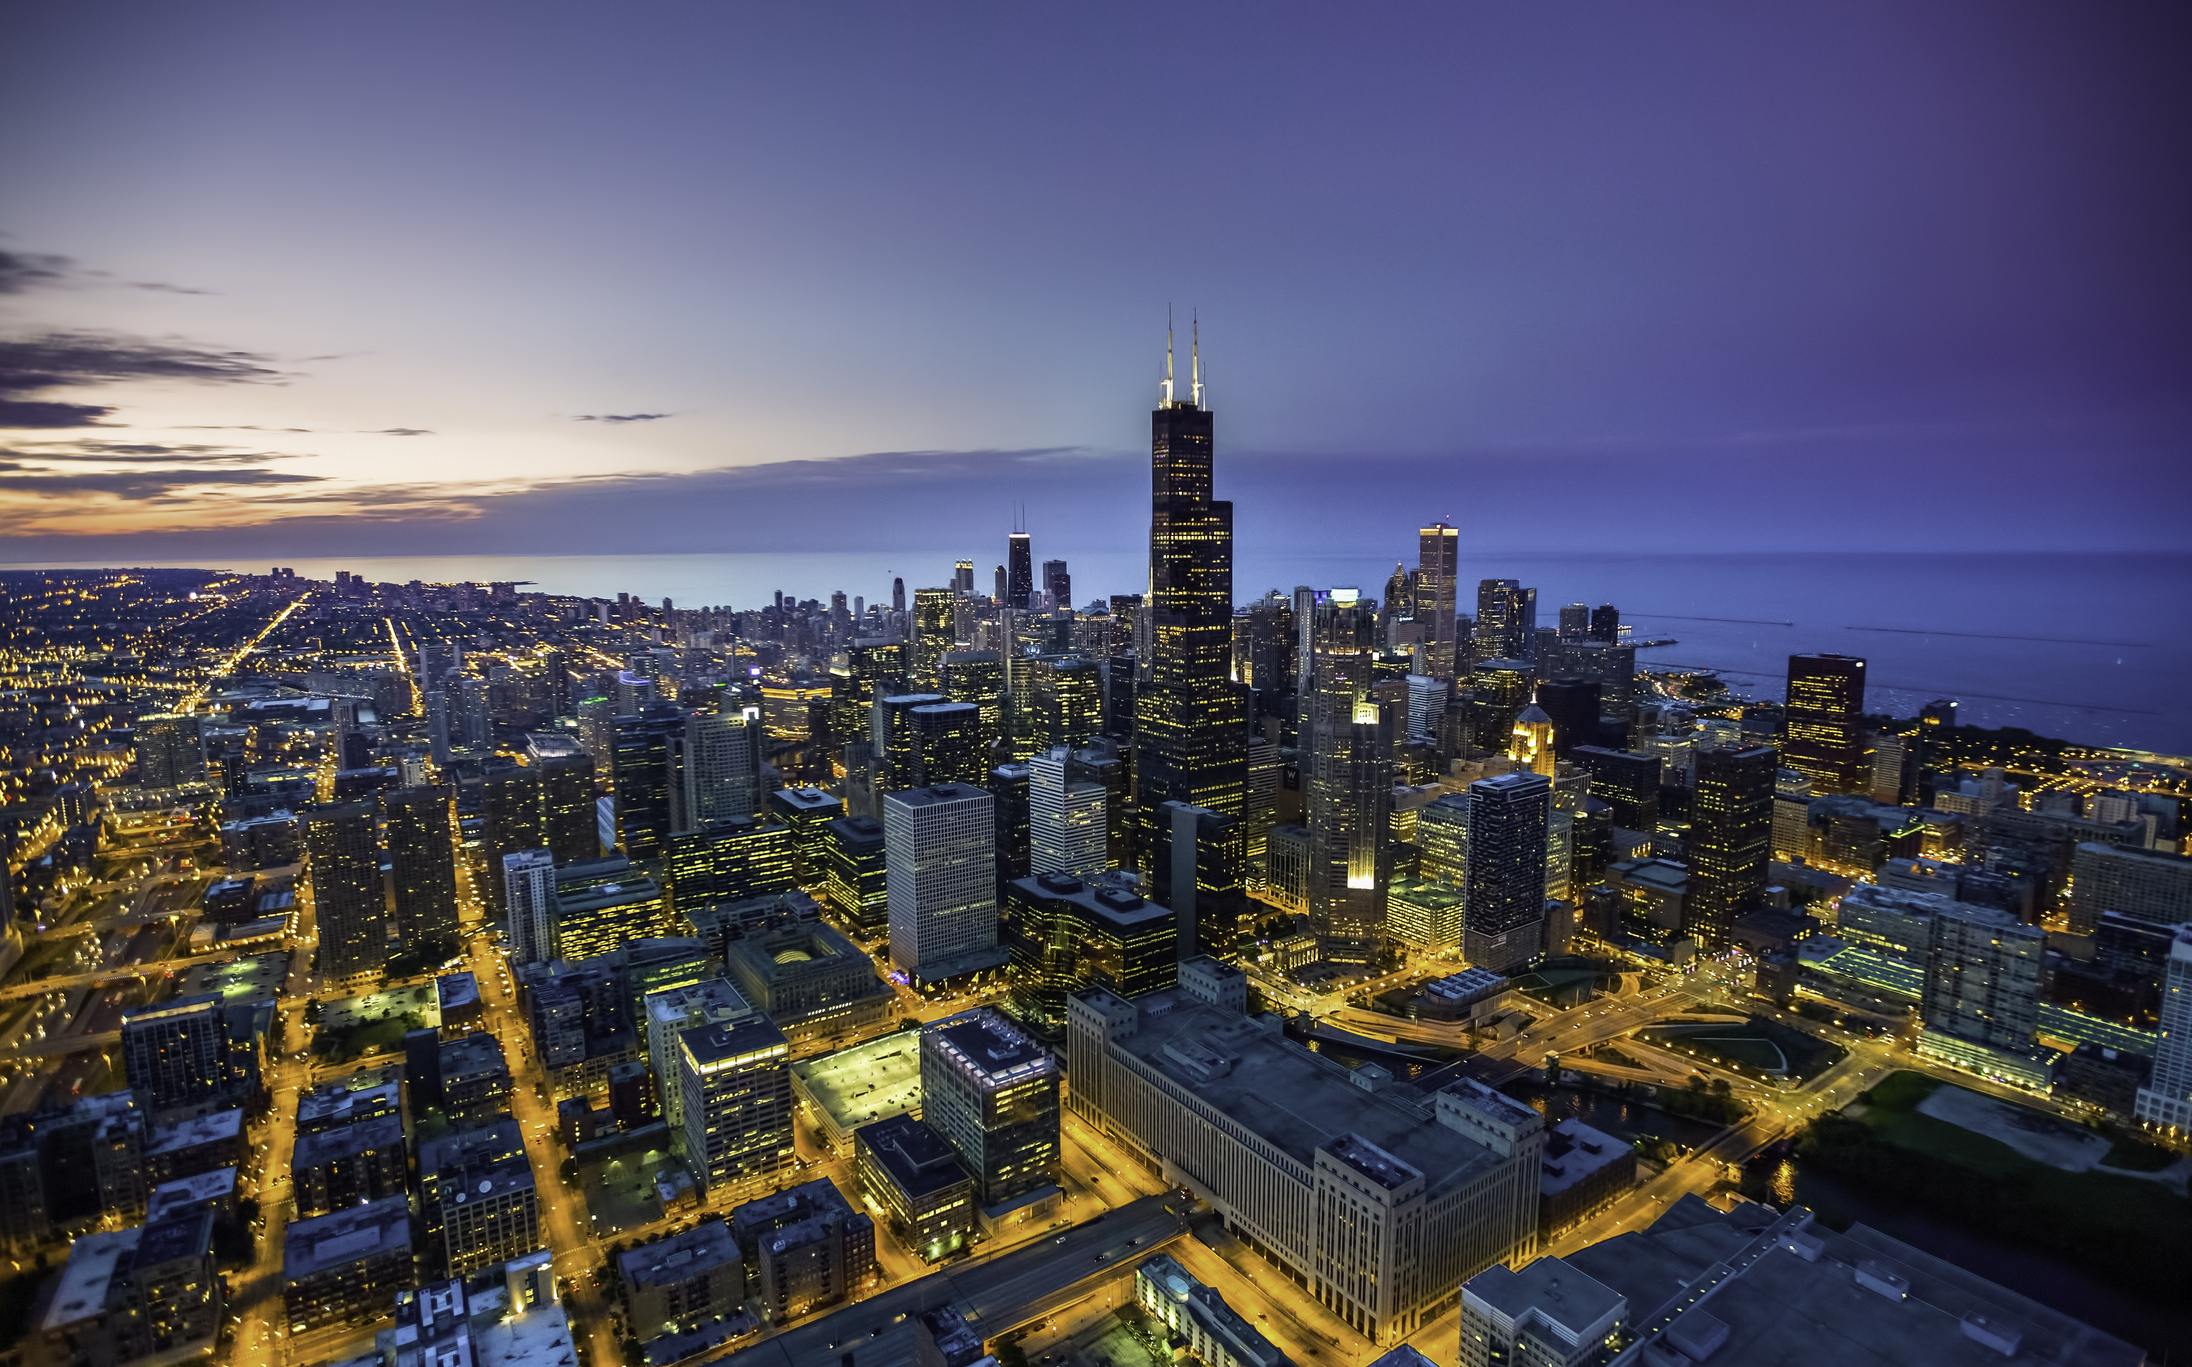 Chicago skyline aerial view at dusk